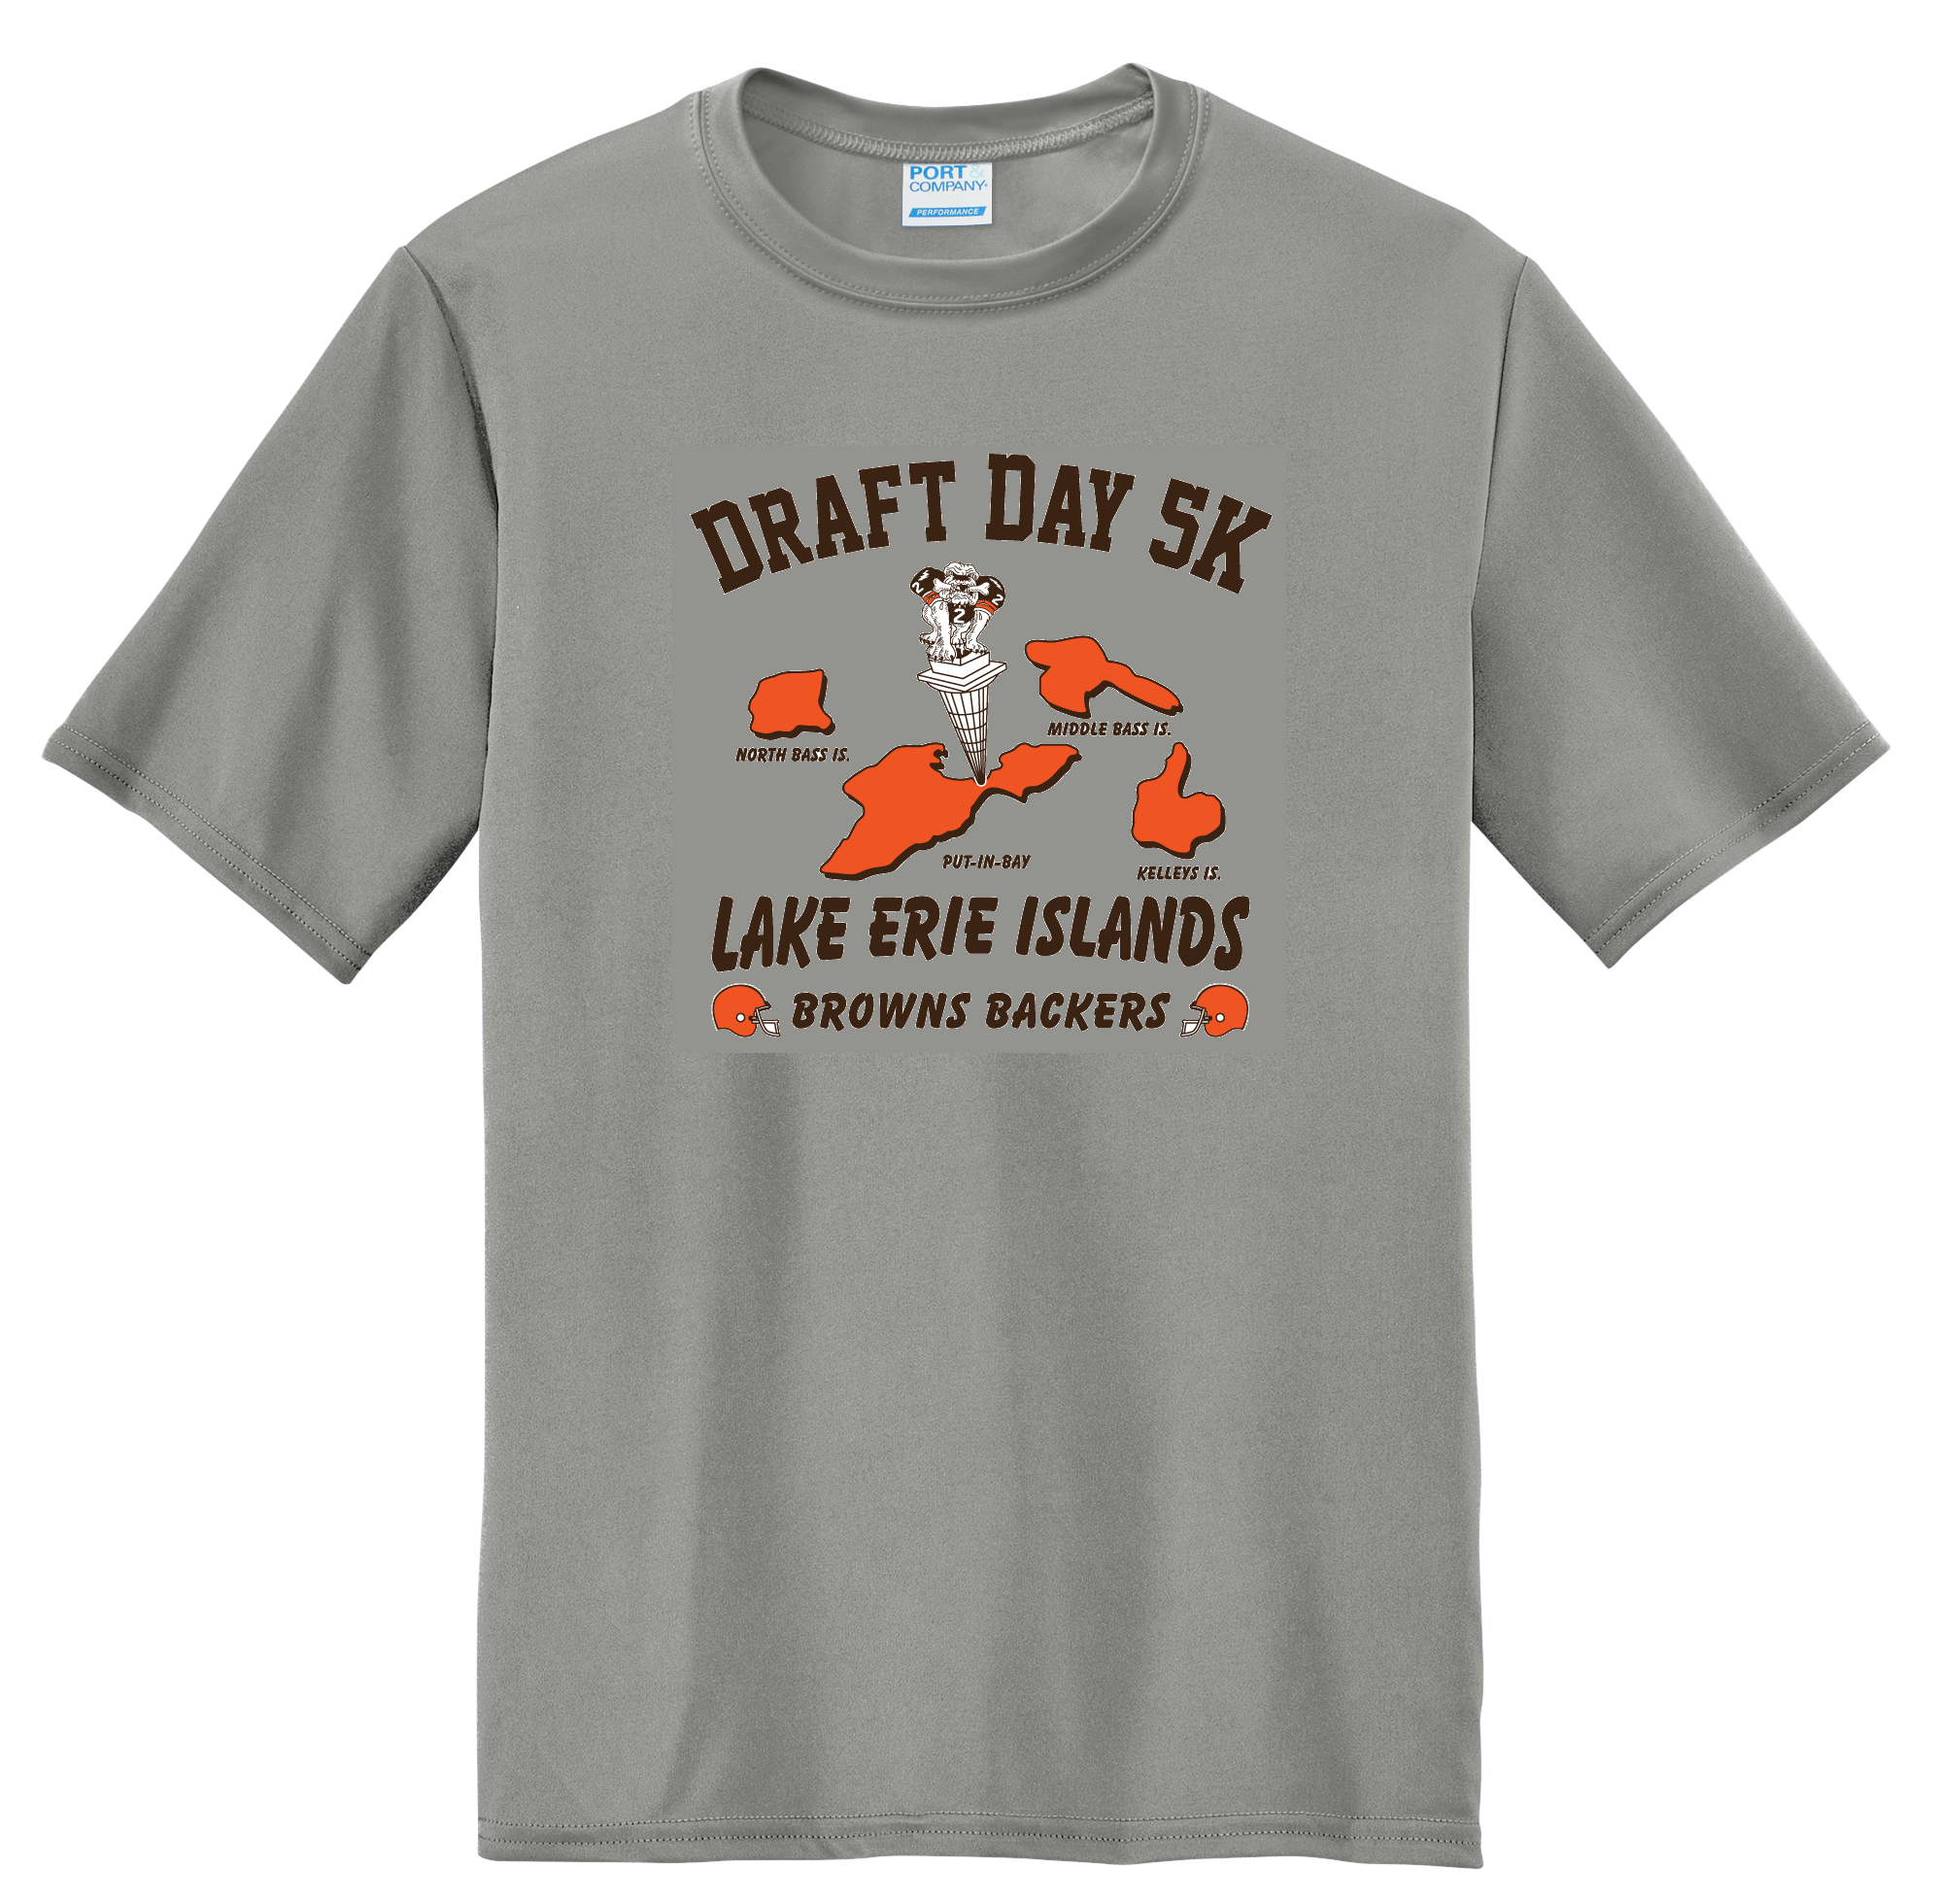 Lake Erie Islands Browns Backers Draft Day 5k at Put-in-Bay Race Shirt